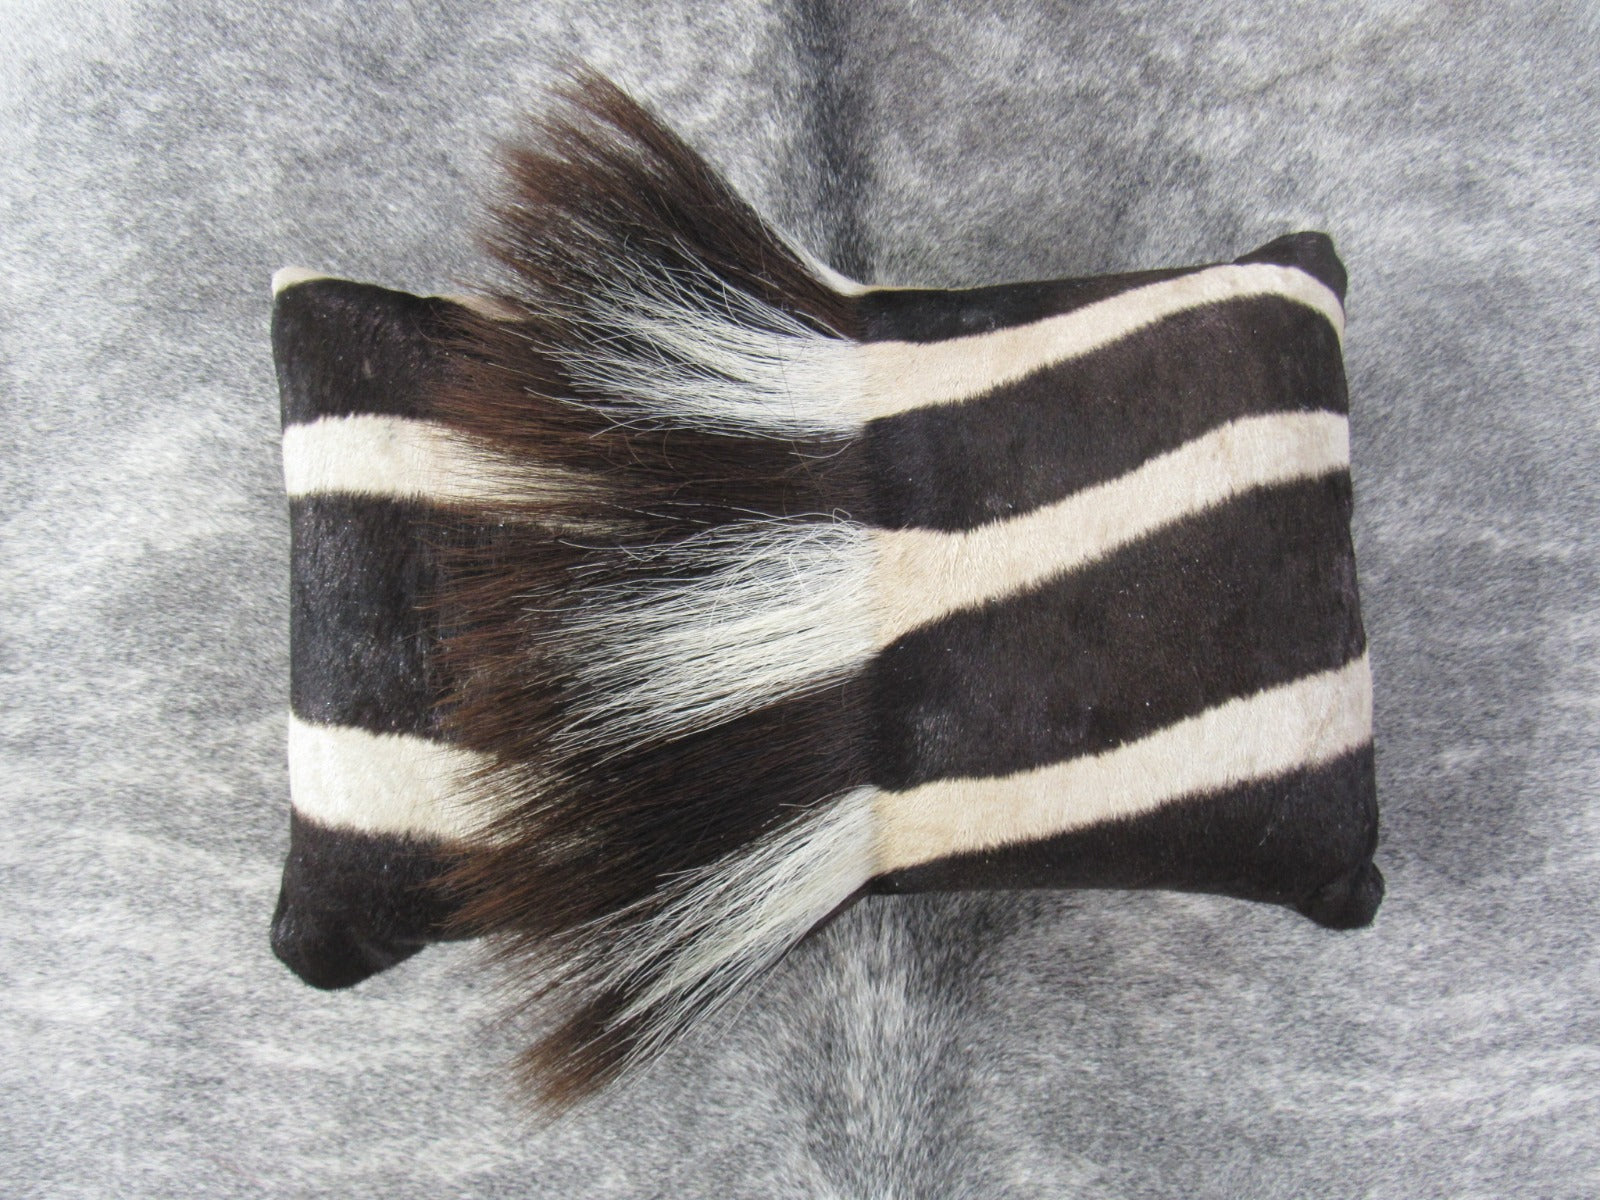 Zebra Neck Pillow 16x10 inches Real Burchell's Zebra Leather Pillow - Made in USA